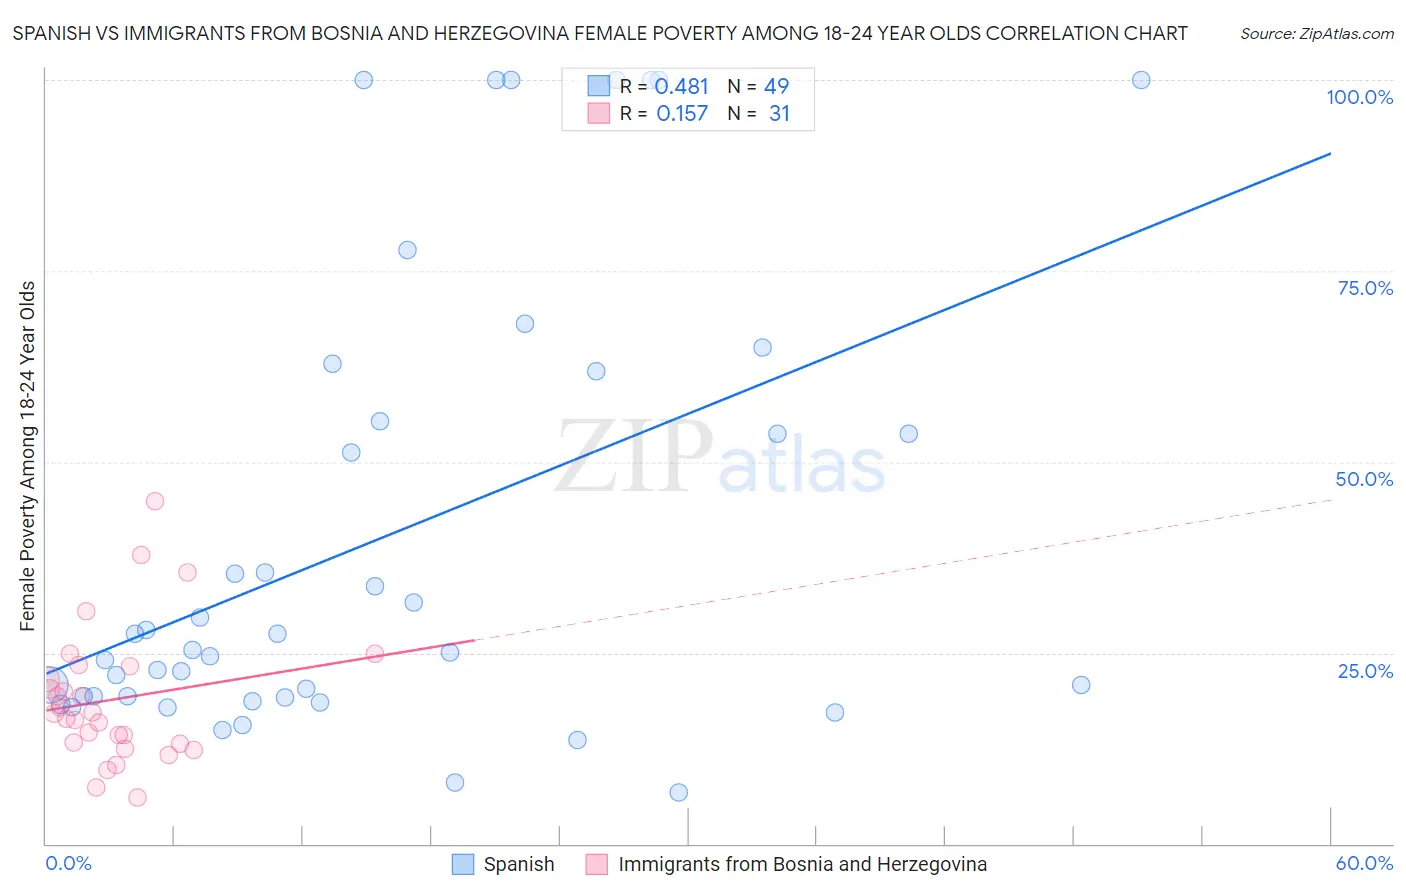 Spanish vs Immigrants from Bosnia and Herzegovina Female Poverty Among 18-24 Year Olds